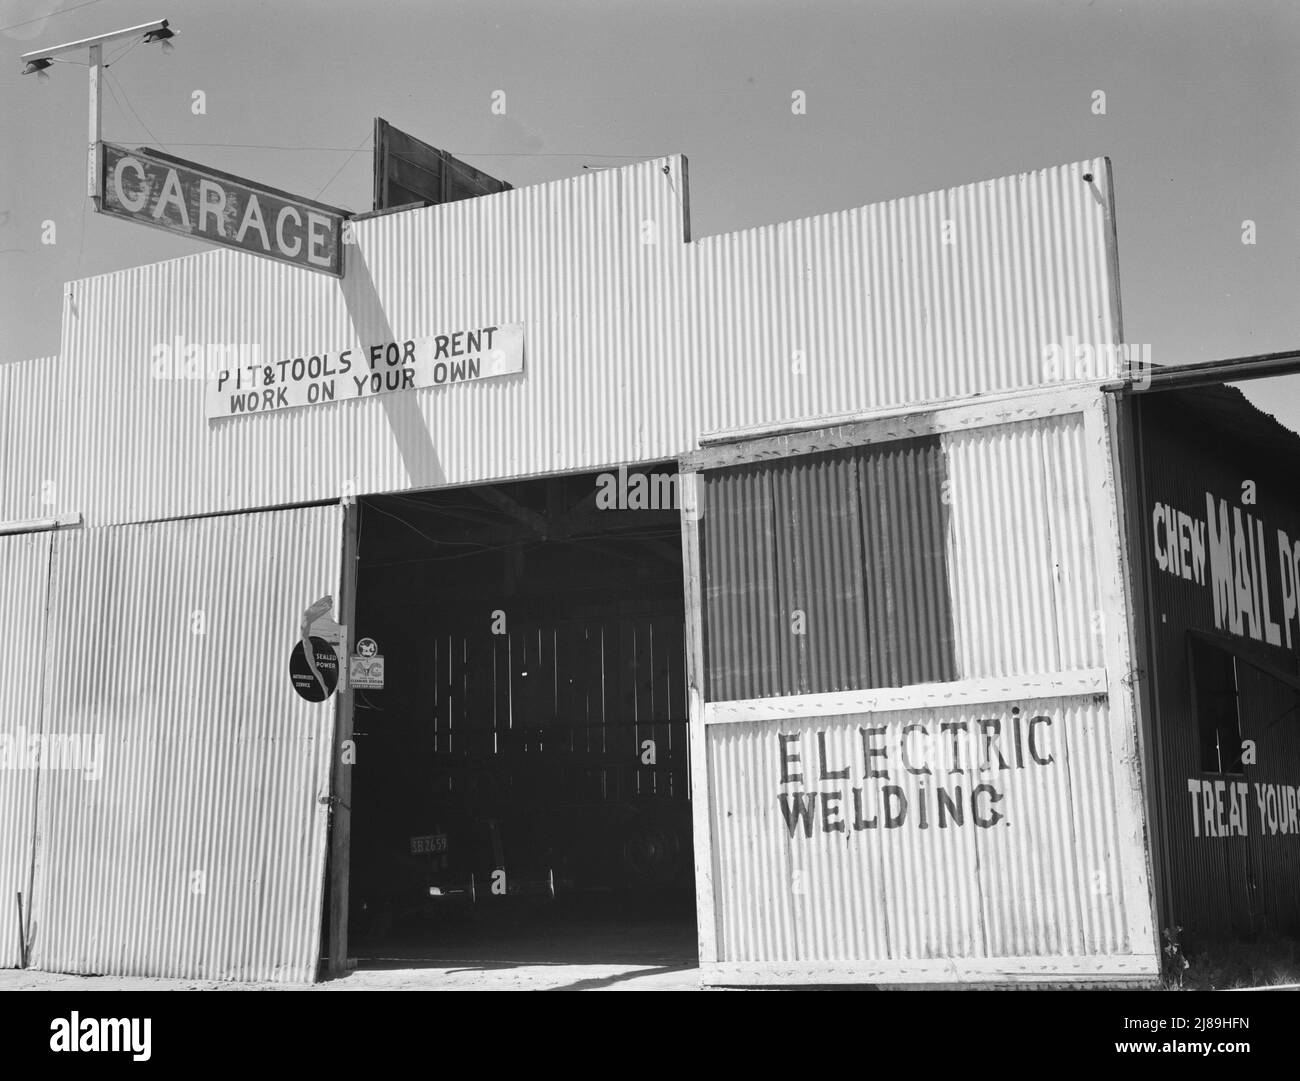 U.S. 99. Fresno County. &quot;Pit and tools for rent--work on your own.&quot; California. ['Garage; Electric Welding']. Stock Photo